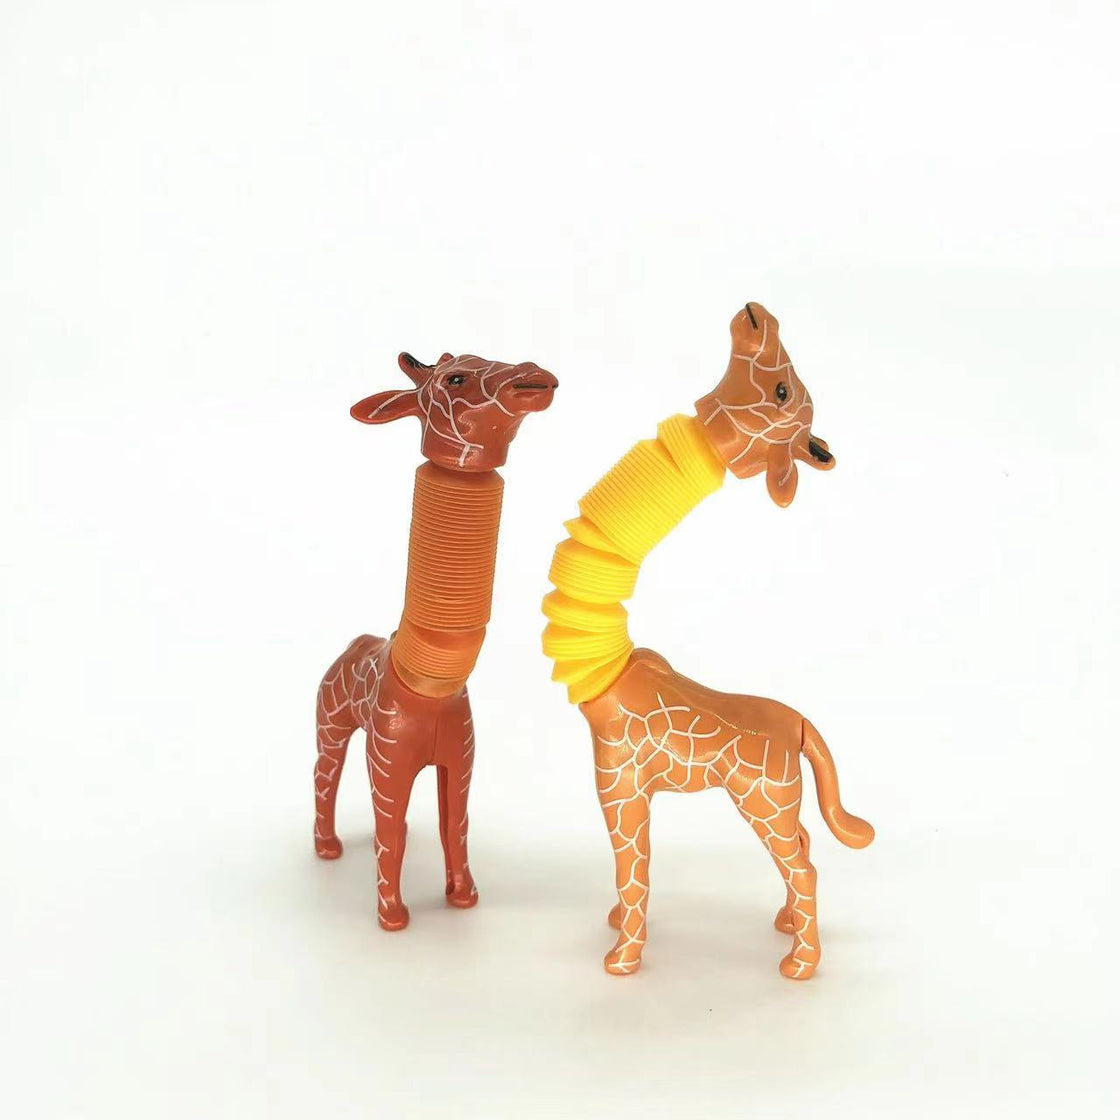 Giraffe Tubes Sensory Toys Novelty Spring Fidget Toy Stretch Tube Stress Relief Toy For Kid Birthday Gift Party Favors